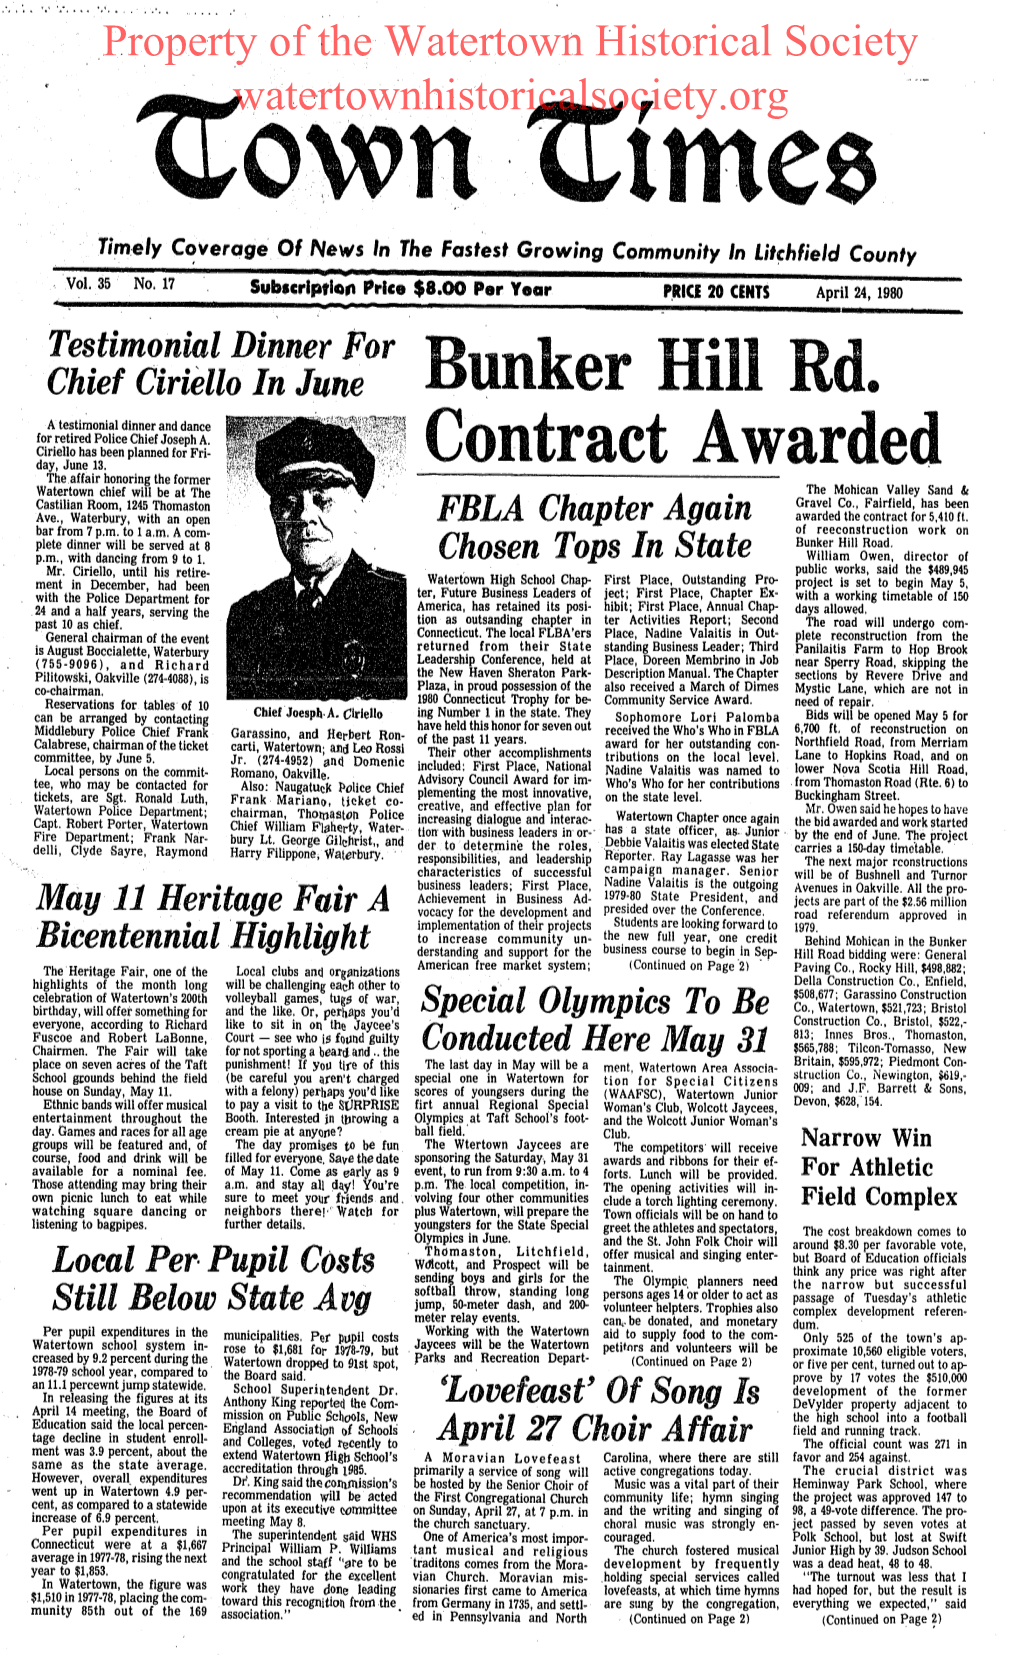 Bunker Hill Rd. Contract Awarded